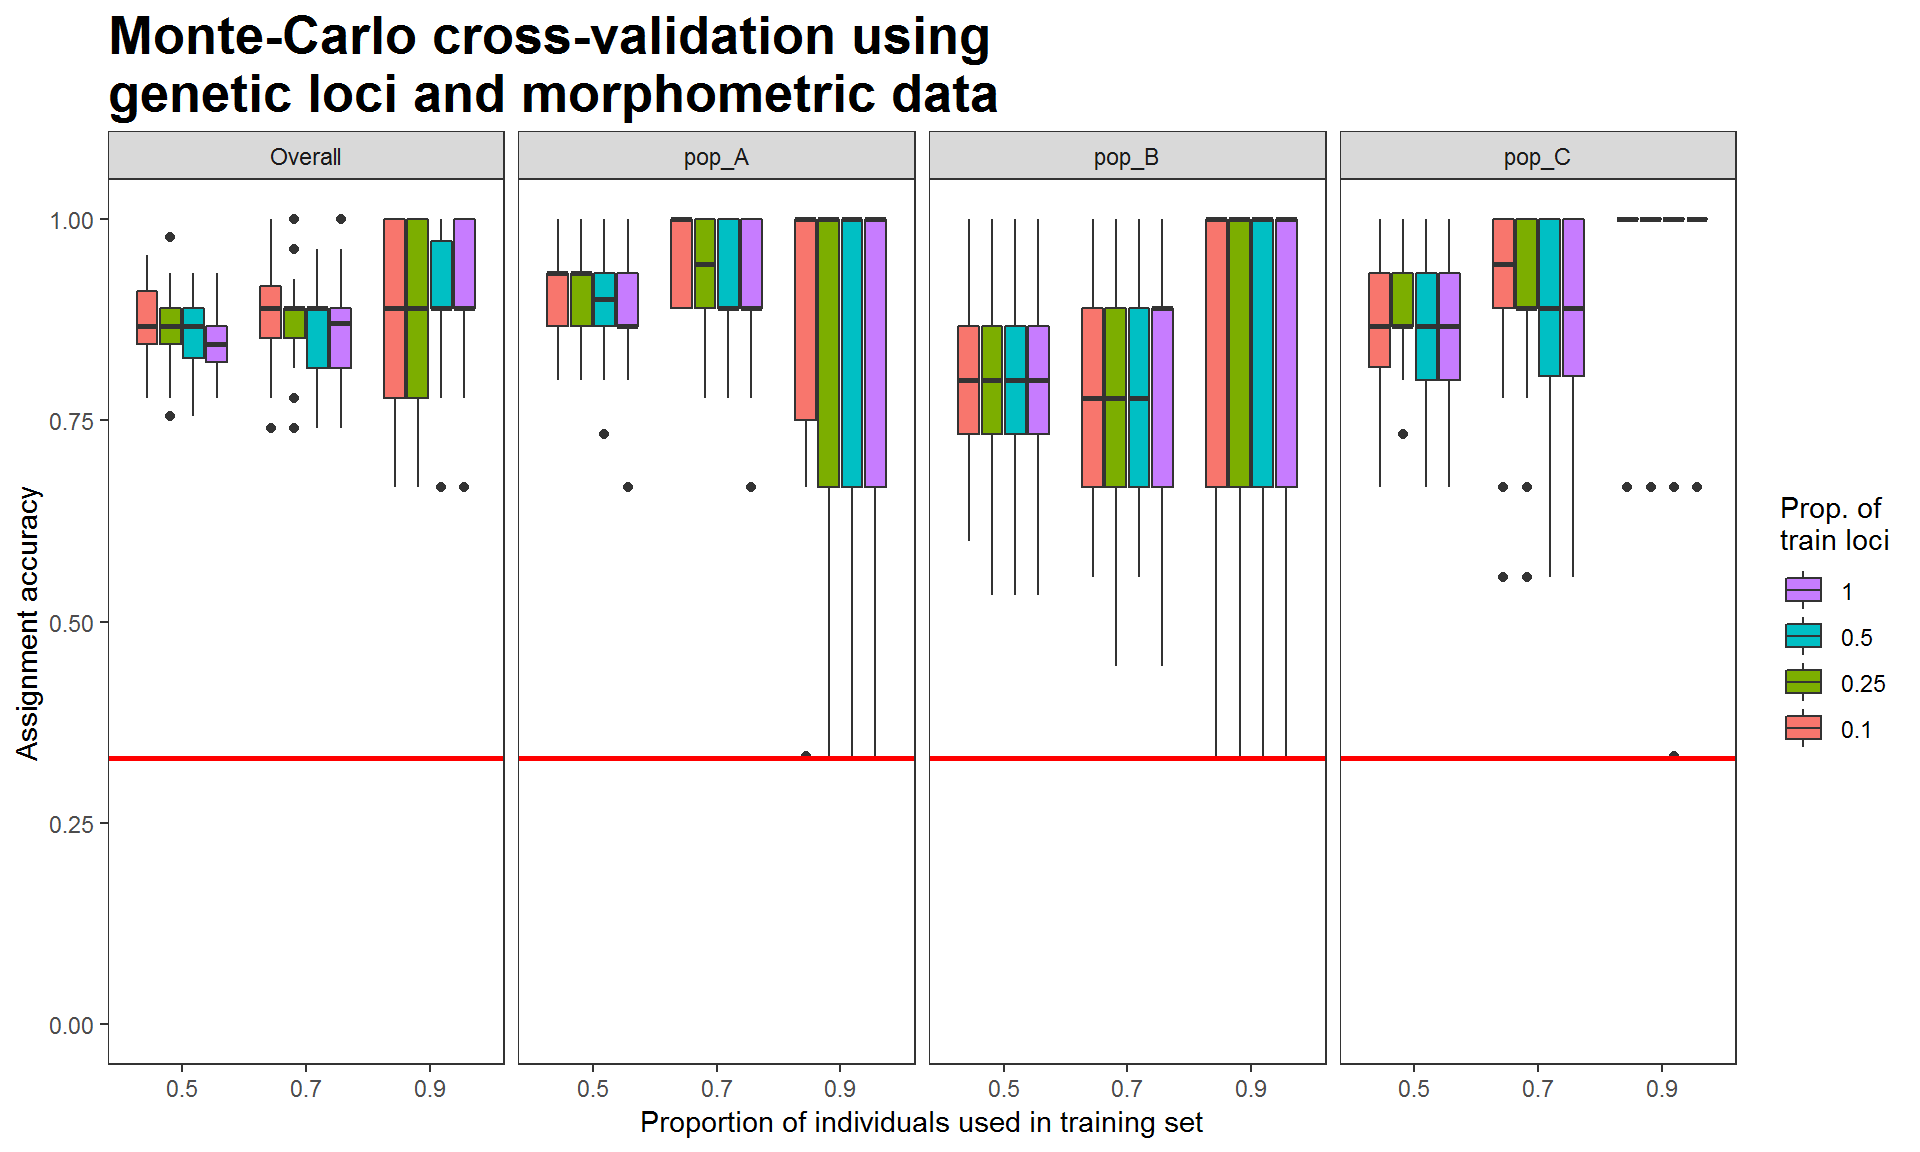 Figure 3. Assignment accuracies estimated via Monte-Carlo cross-validation, using genetic and morphometric data. Each box is the results of using a proportion of training loci plus 4 morphometric variables